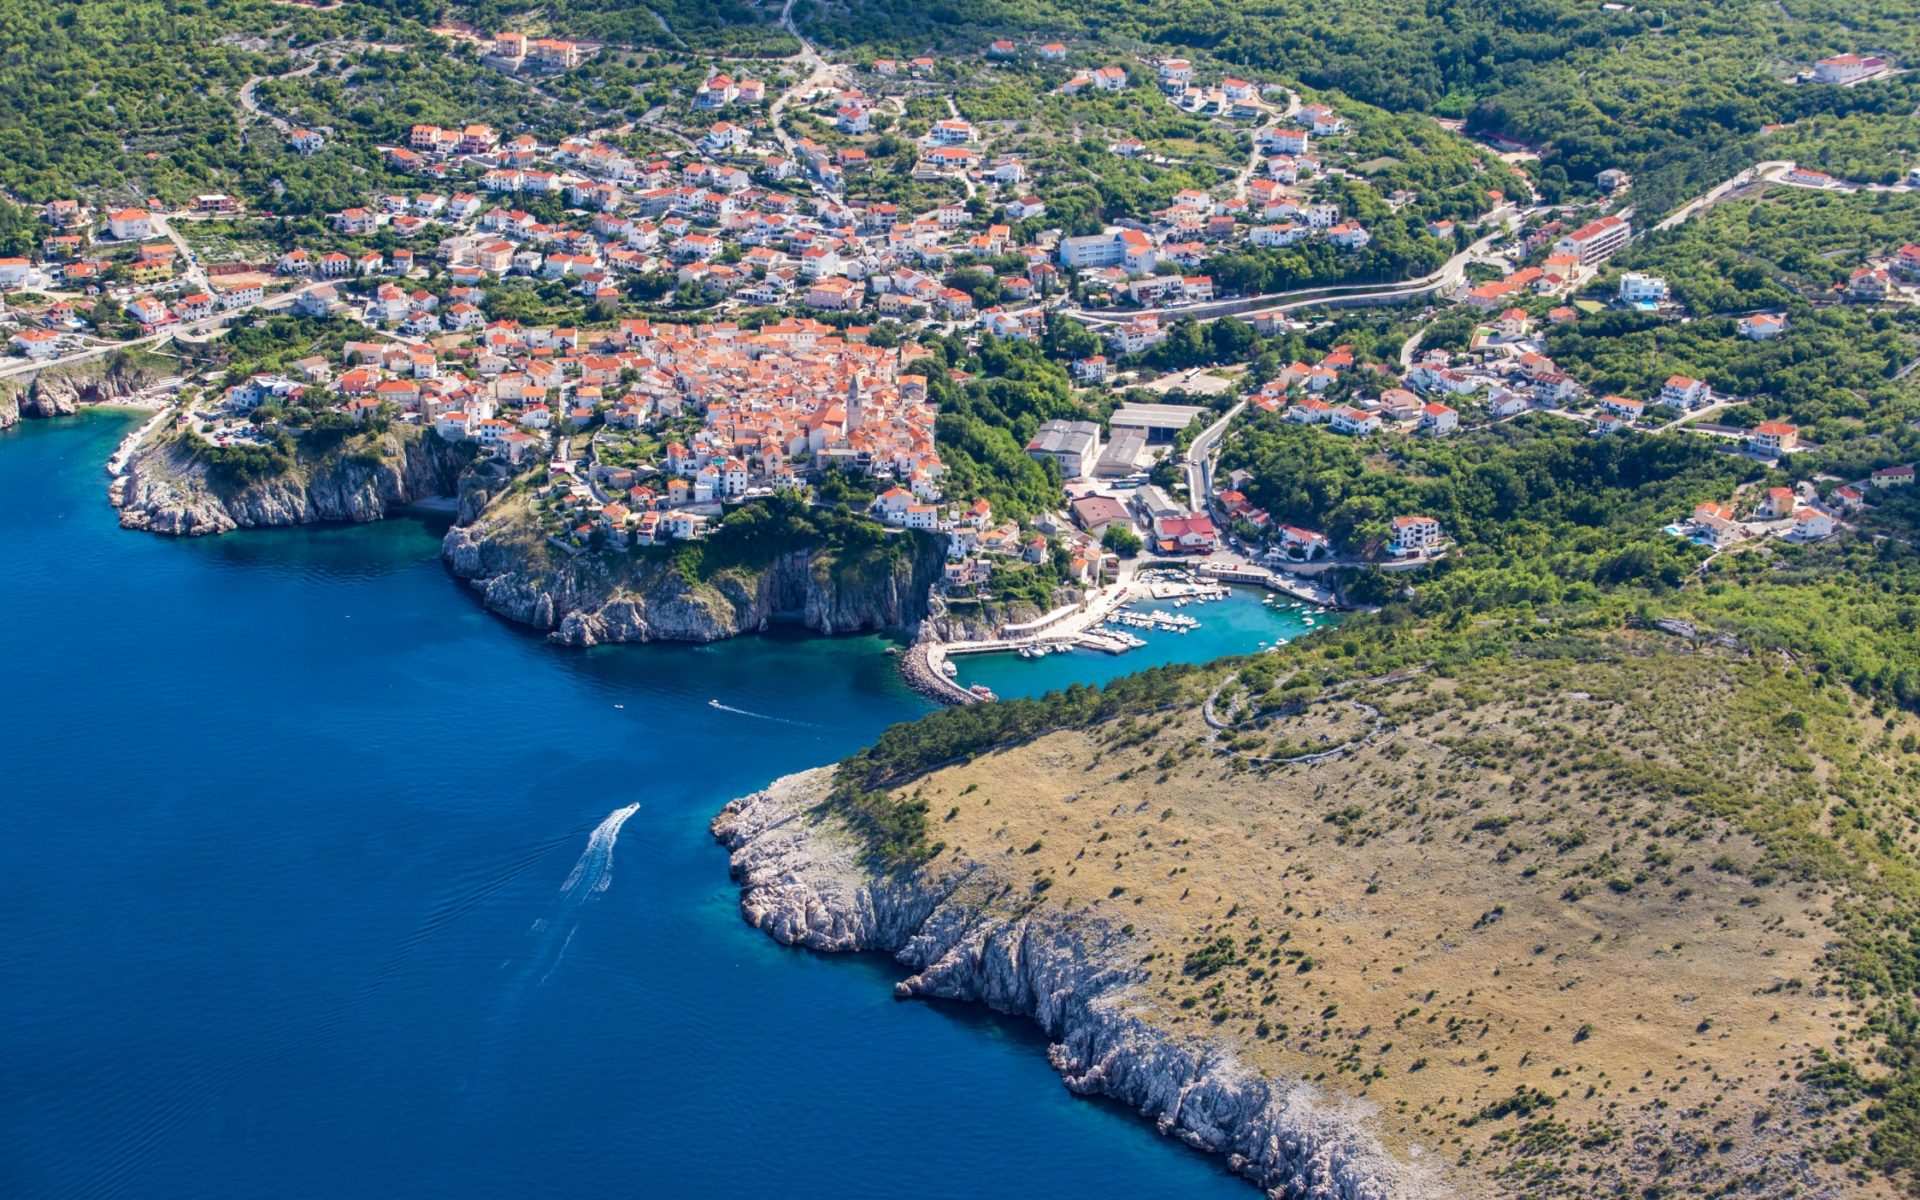 Aerial view of the town of Vrbnik perched on a hill with the sea and harbor below.